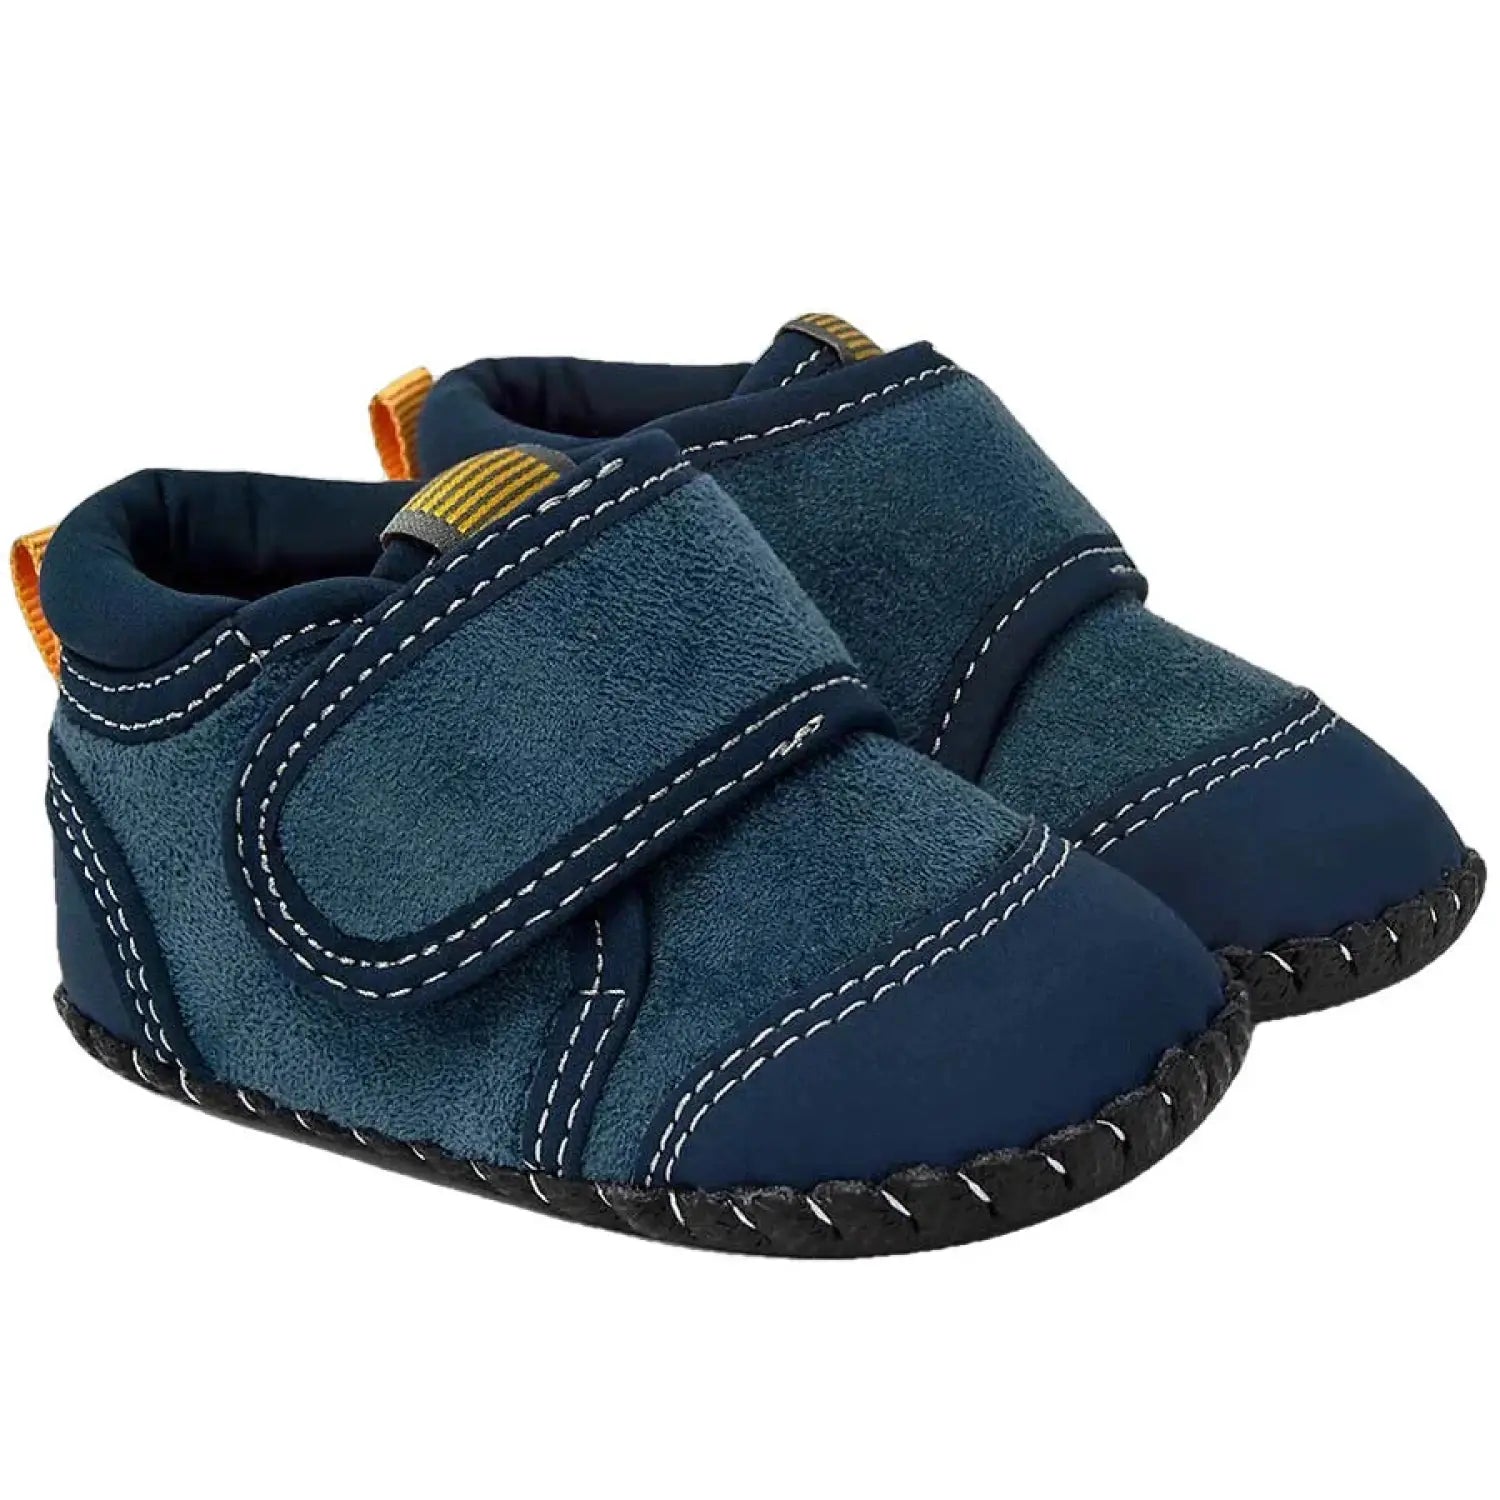 Pediped Originals® Watson Blue, both shoes shown side by side. Navy shoes with velcro buckle.